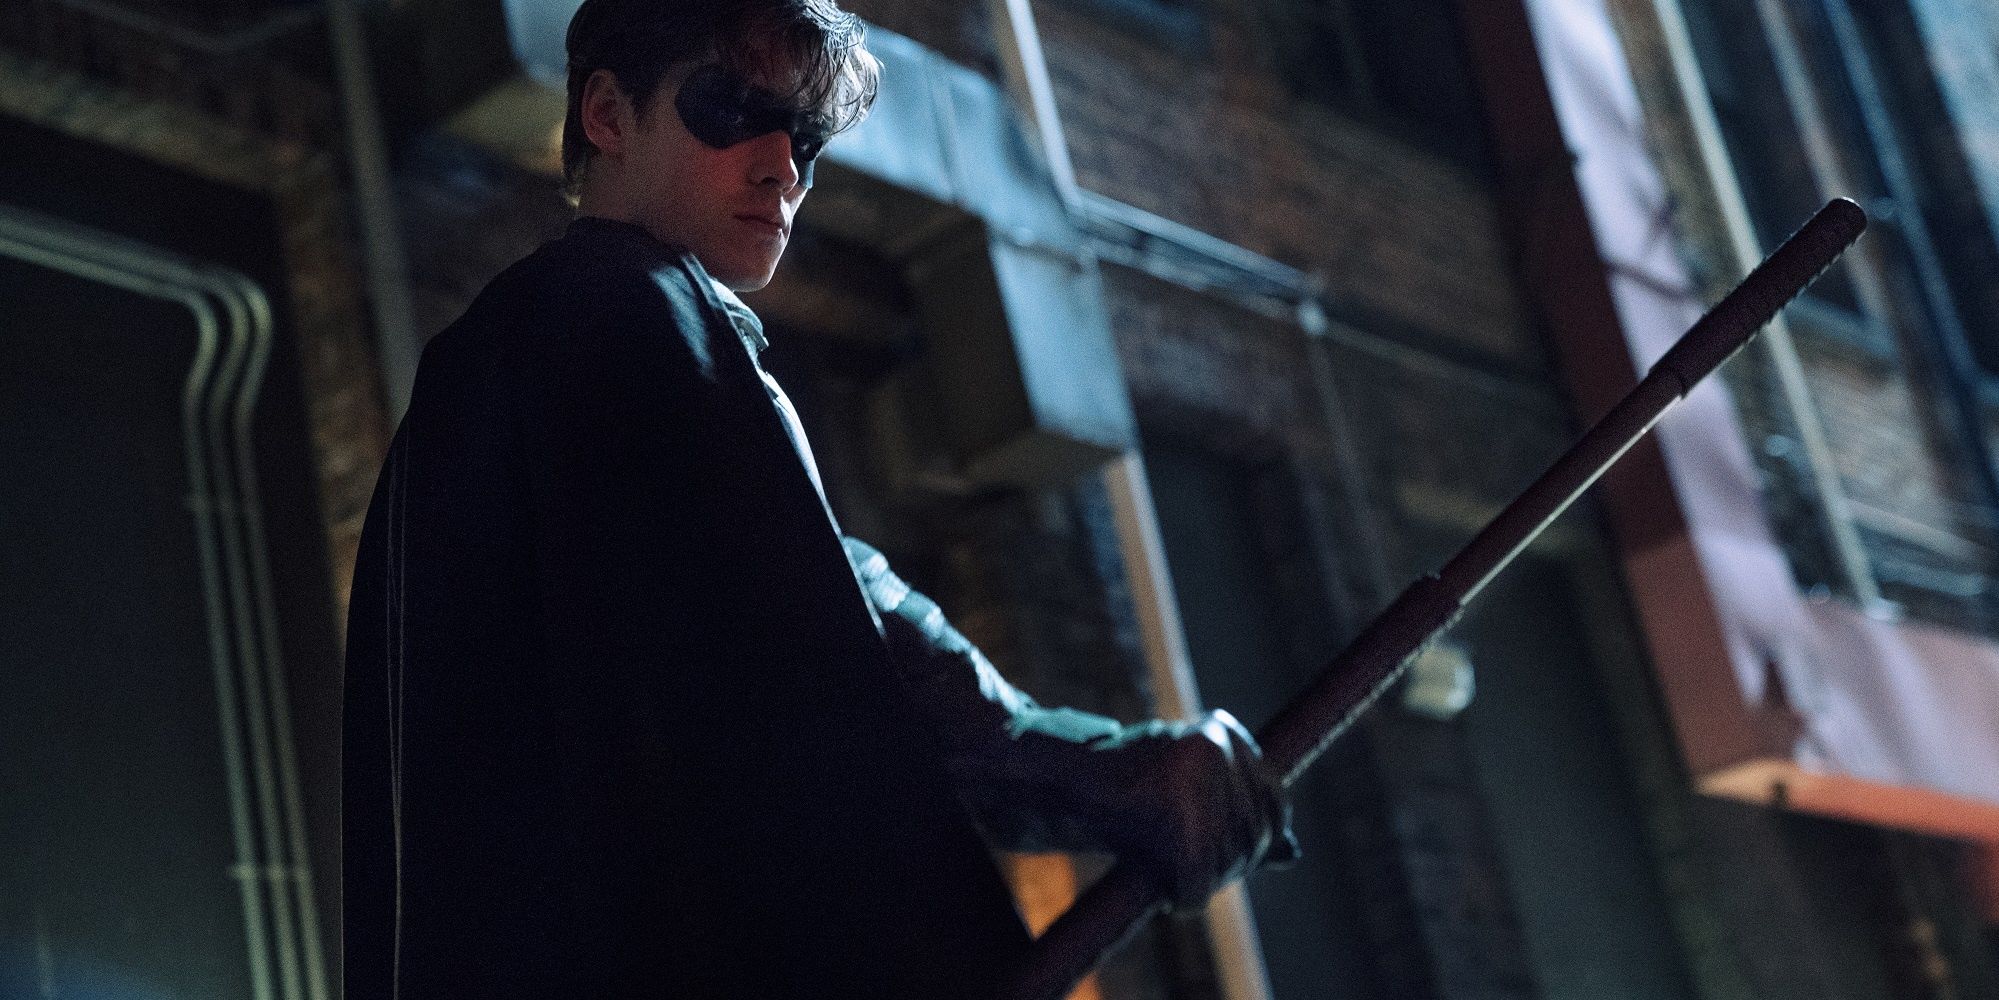 Titans 5 Things About The Show HBO Max Needs To Fix (& 5 We Love)